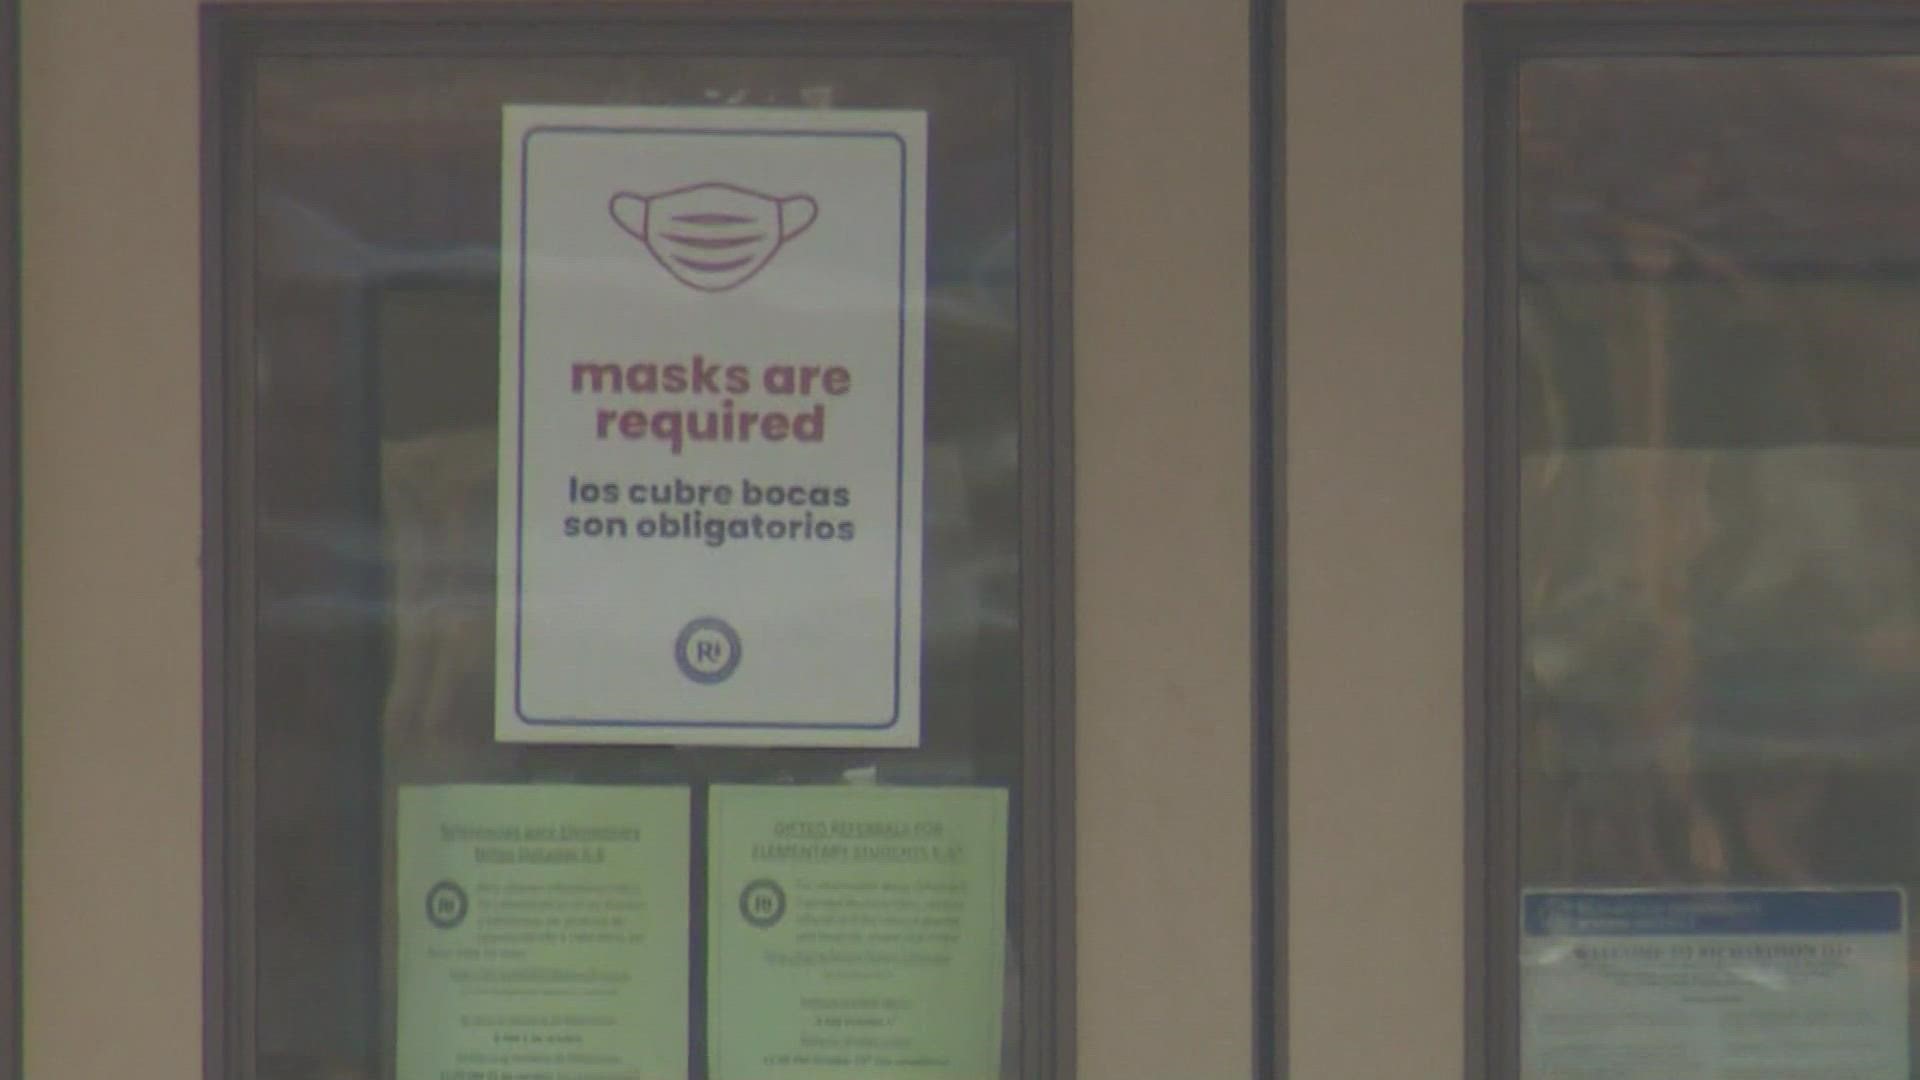 The Richardson ISD board will soon be faced with a decision whether to extend the mask requirement beyond the month of January.